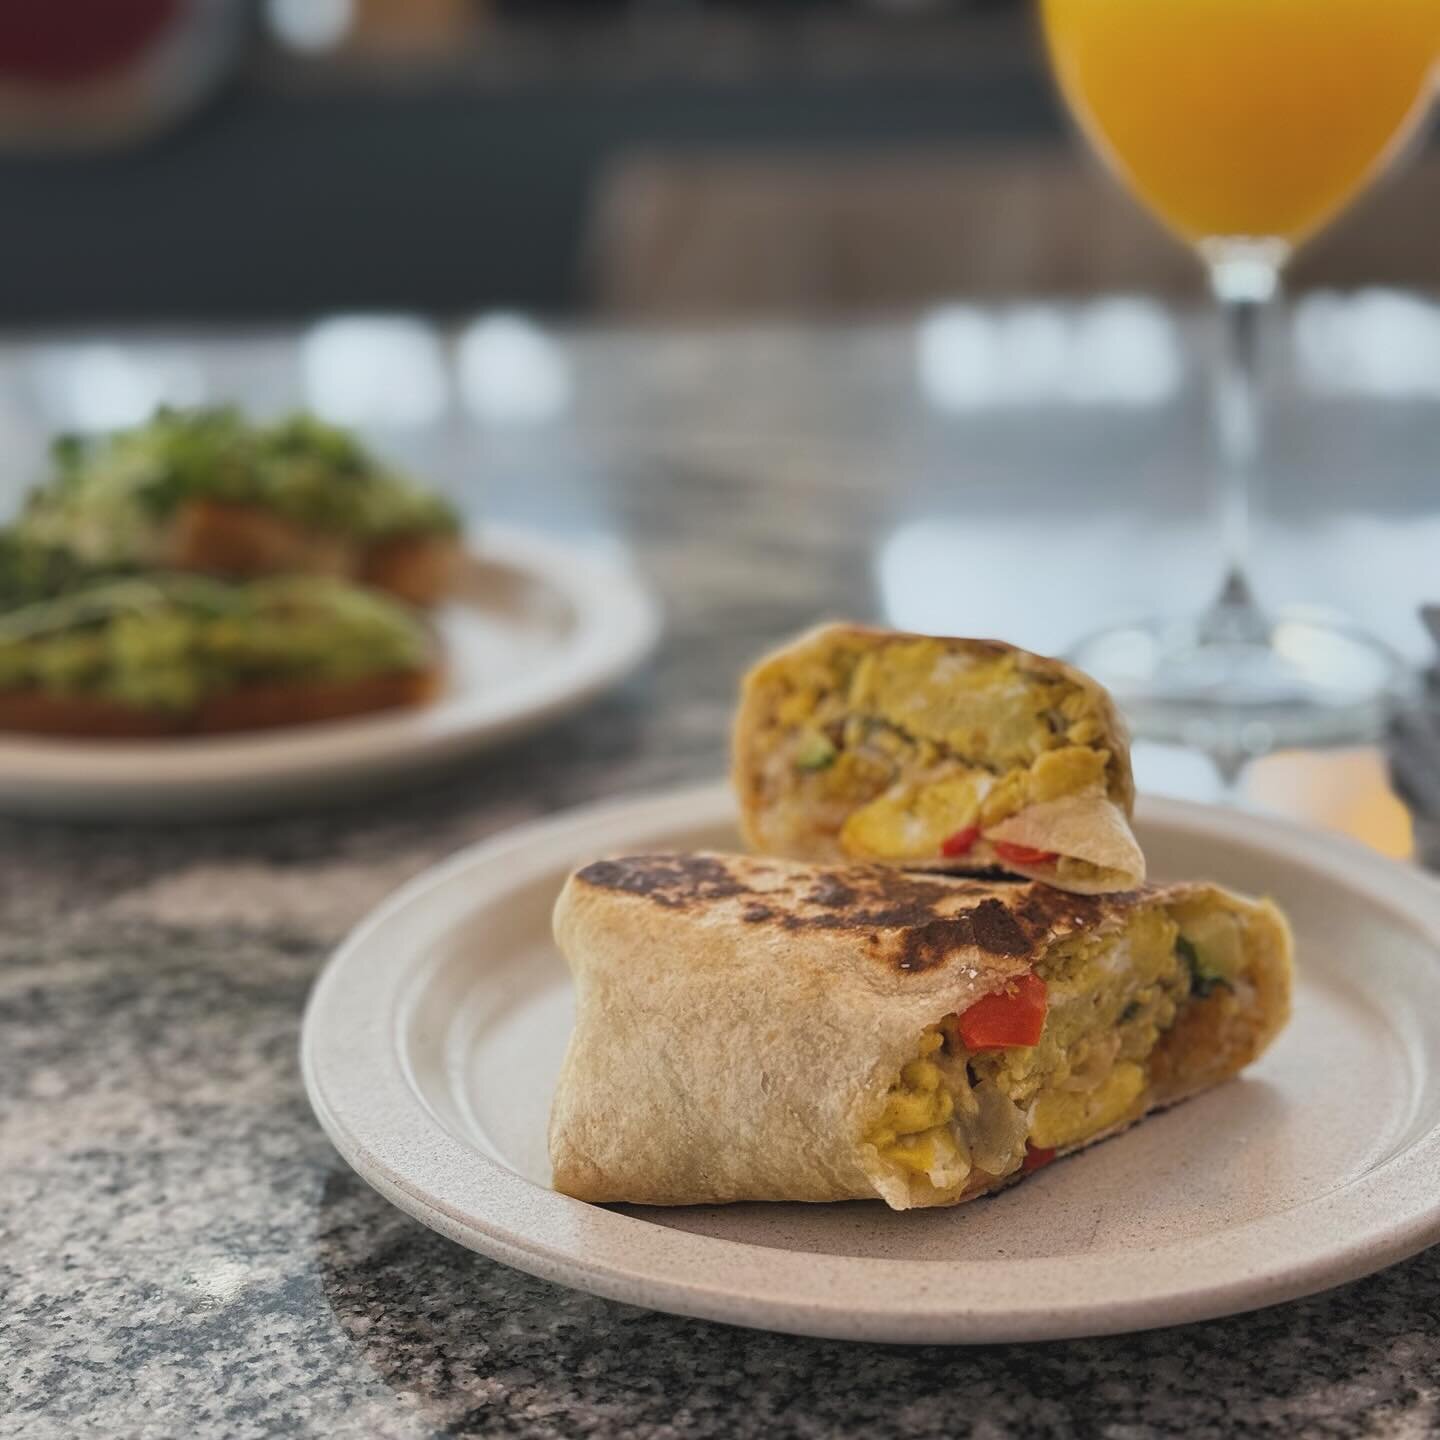 introducing breakfast burritos, one of the many new breakfast options now available from 8am - 11am 

🤍

#missoula #breakfasttime #cafeflorabella #breakfast #eatlocal #missoulaeats